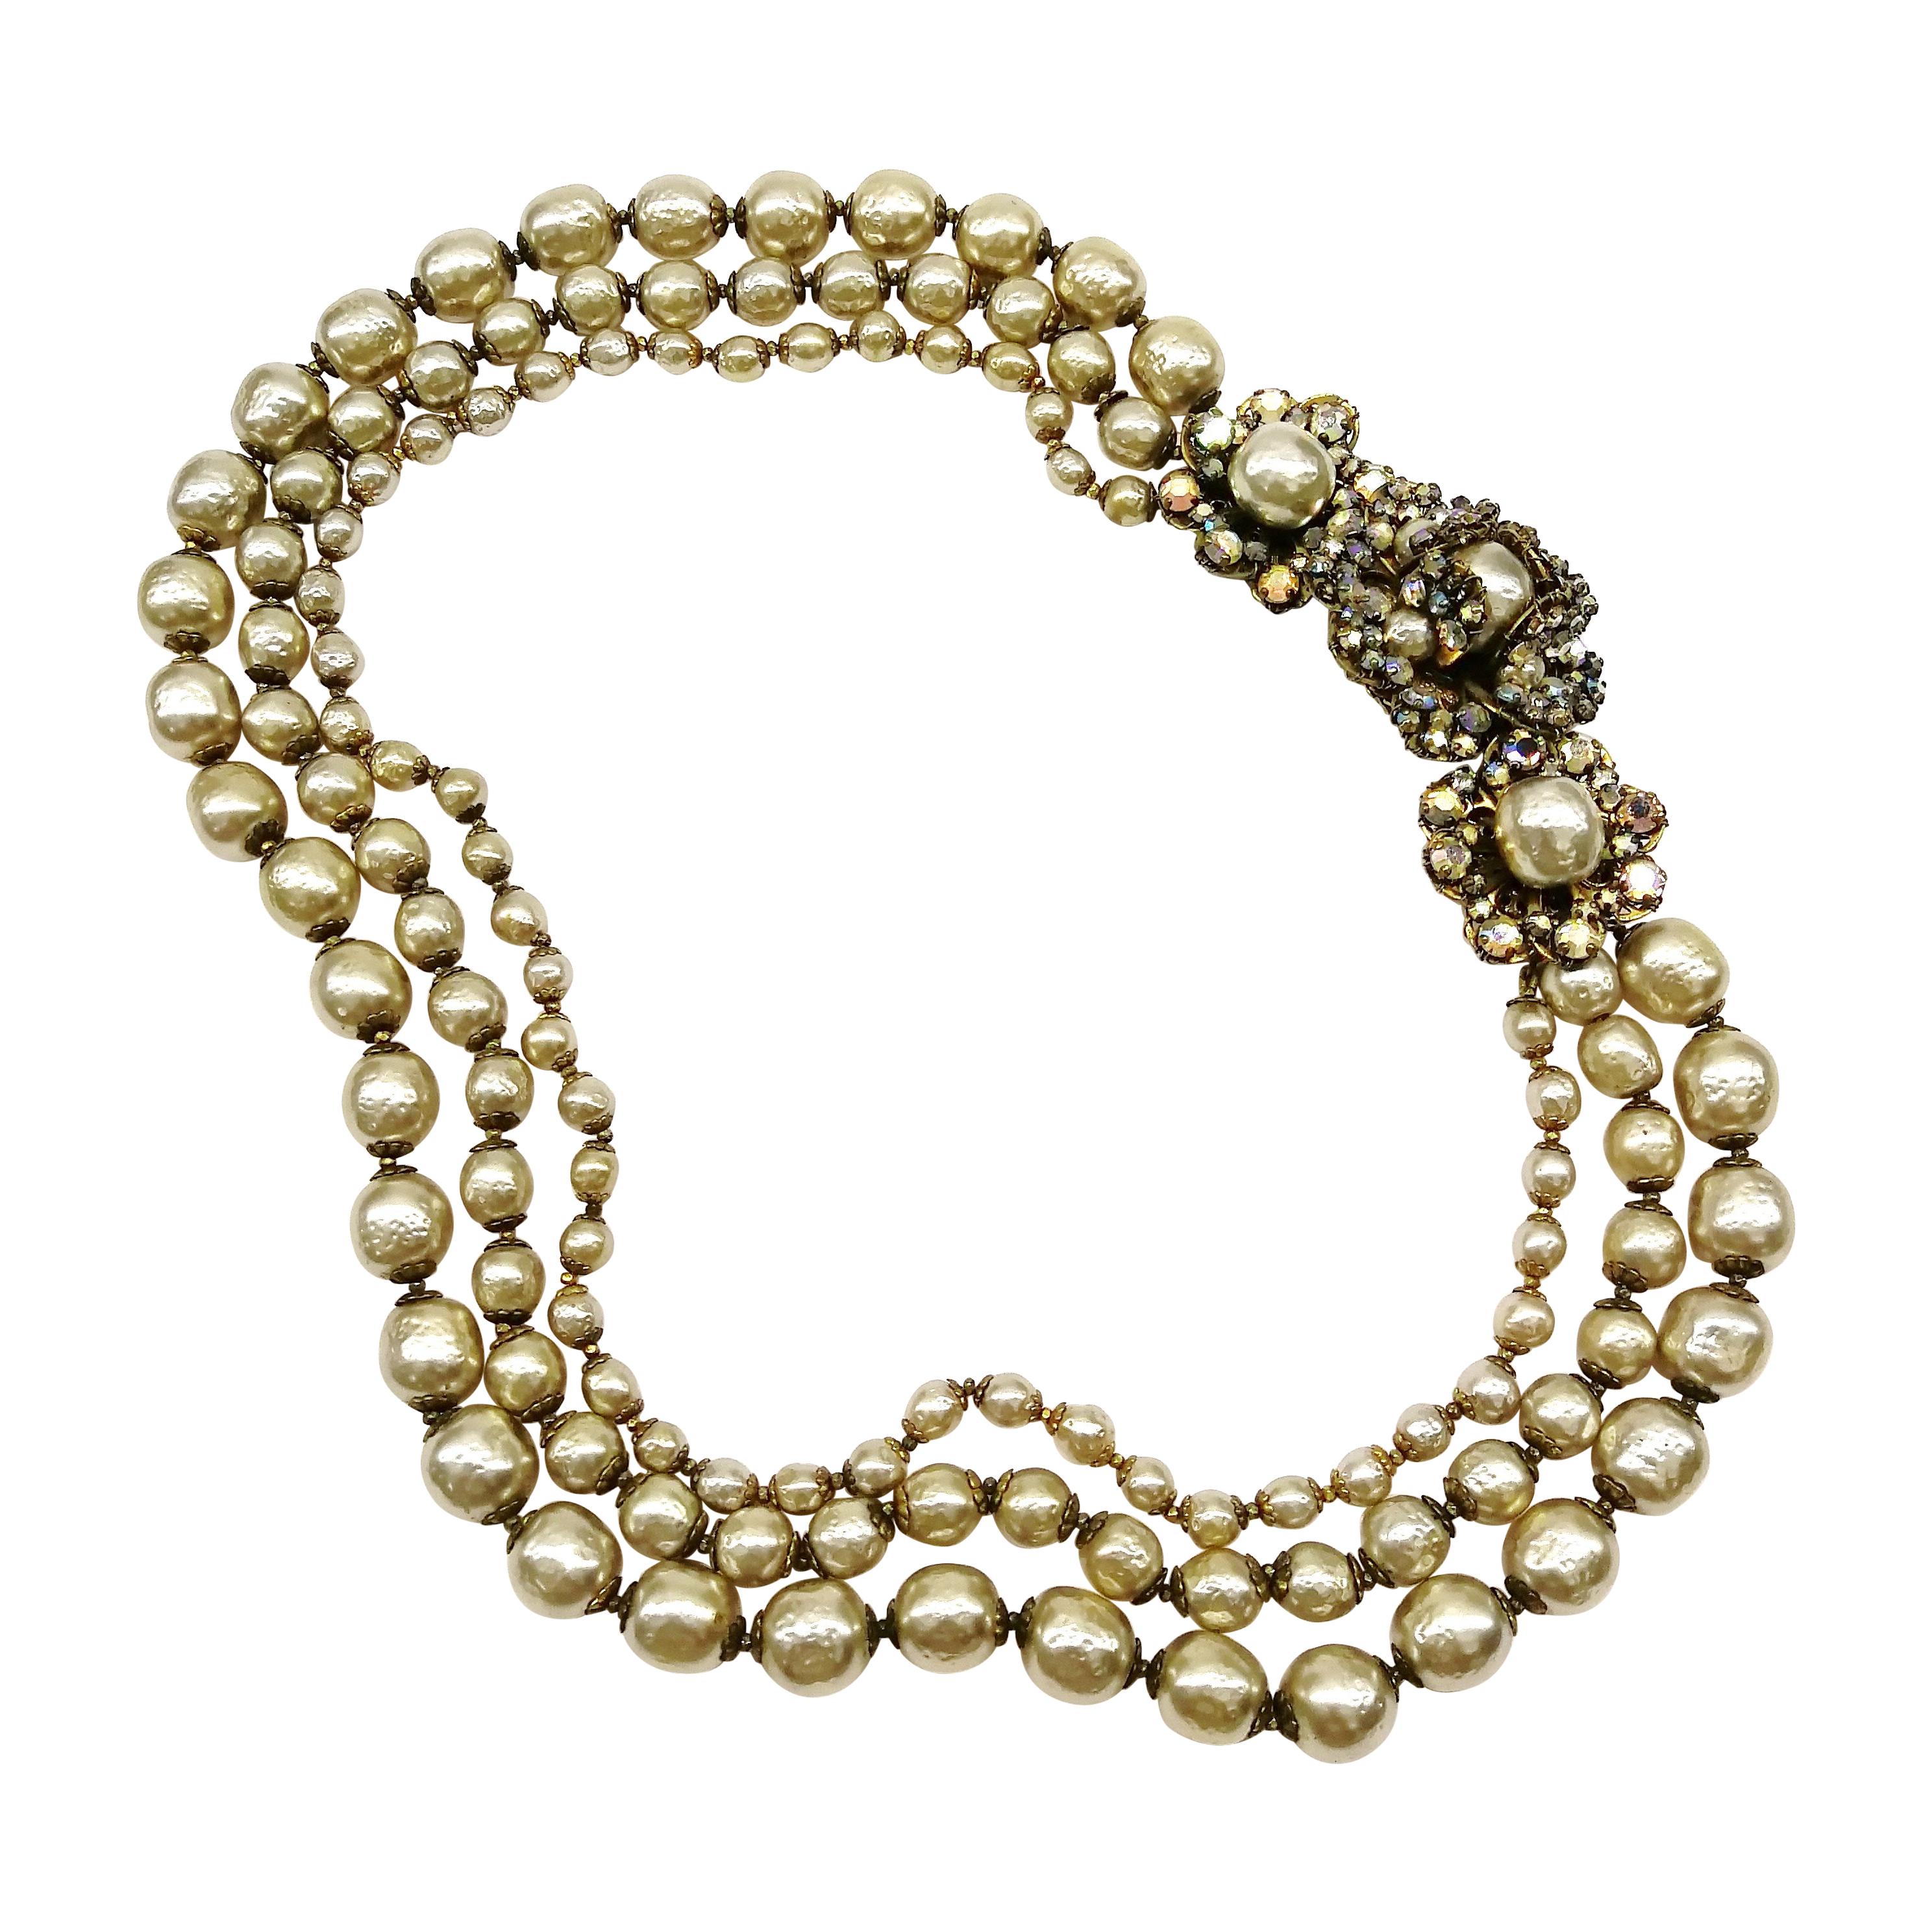 A baroque pearl and iridescent paste three row necklace, Miriam Haskell, 1950s